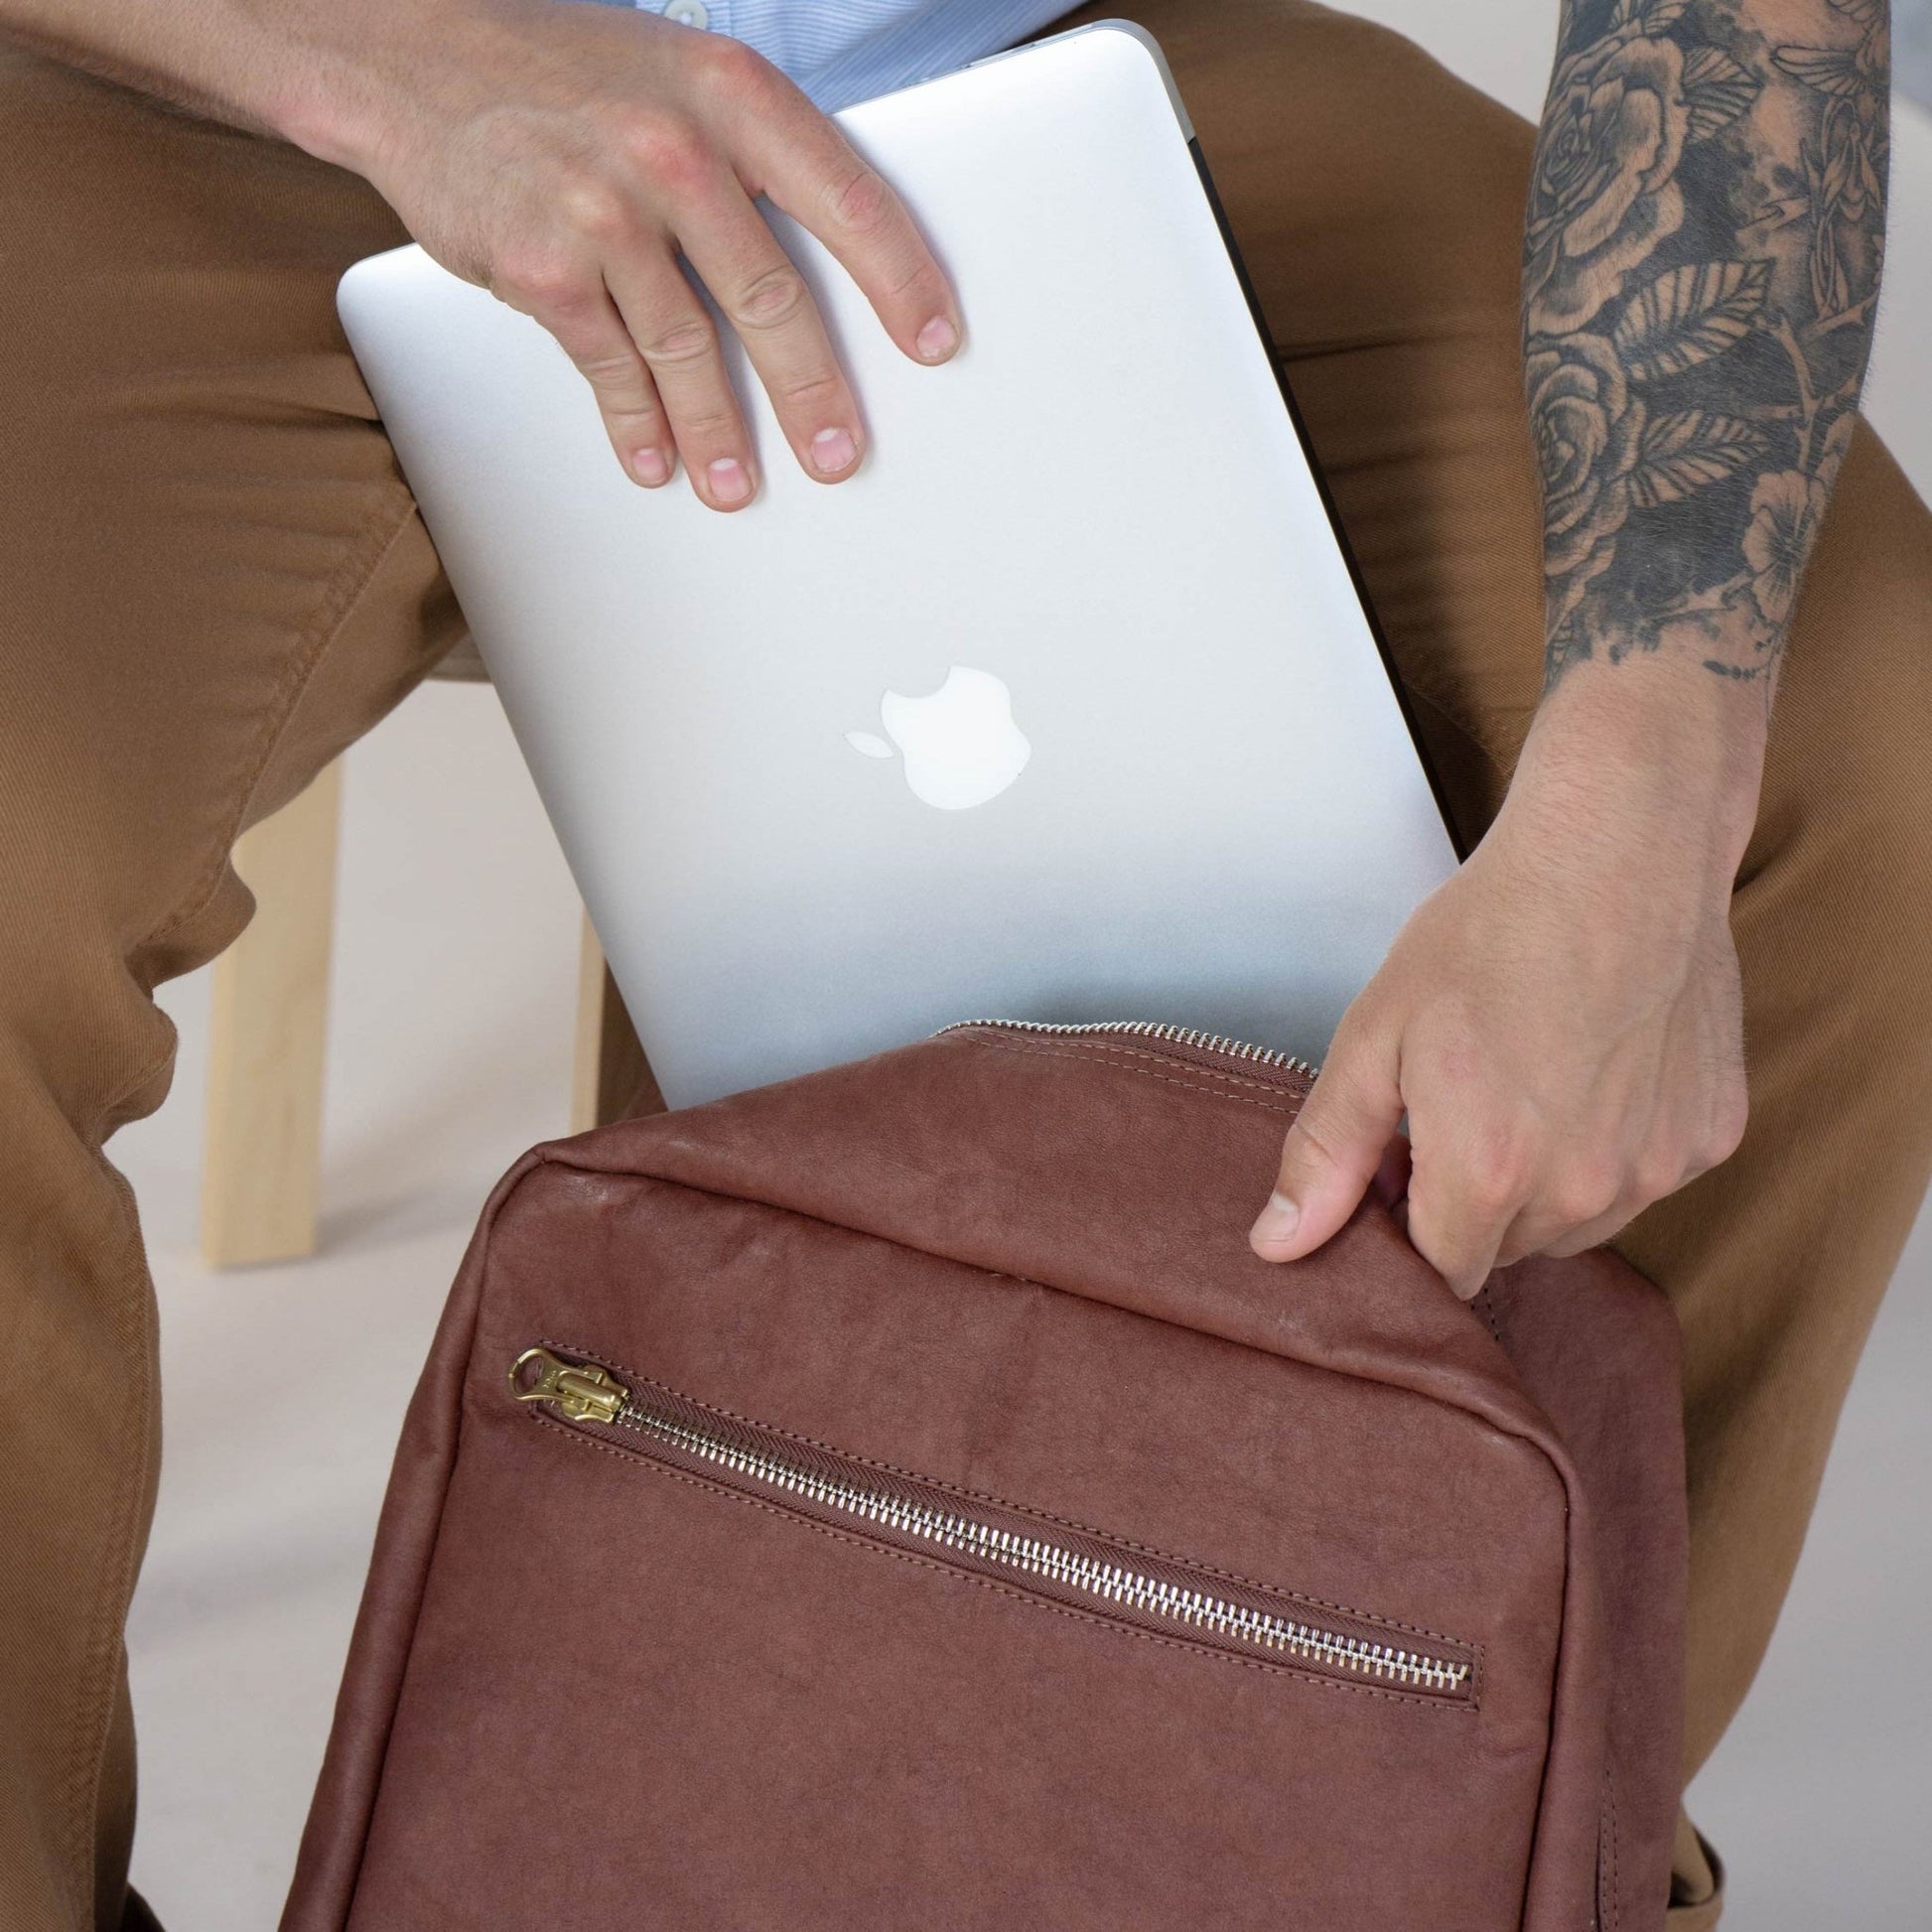 A man is shown sliding a laptop into a square washable paper backpack.